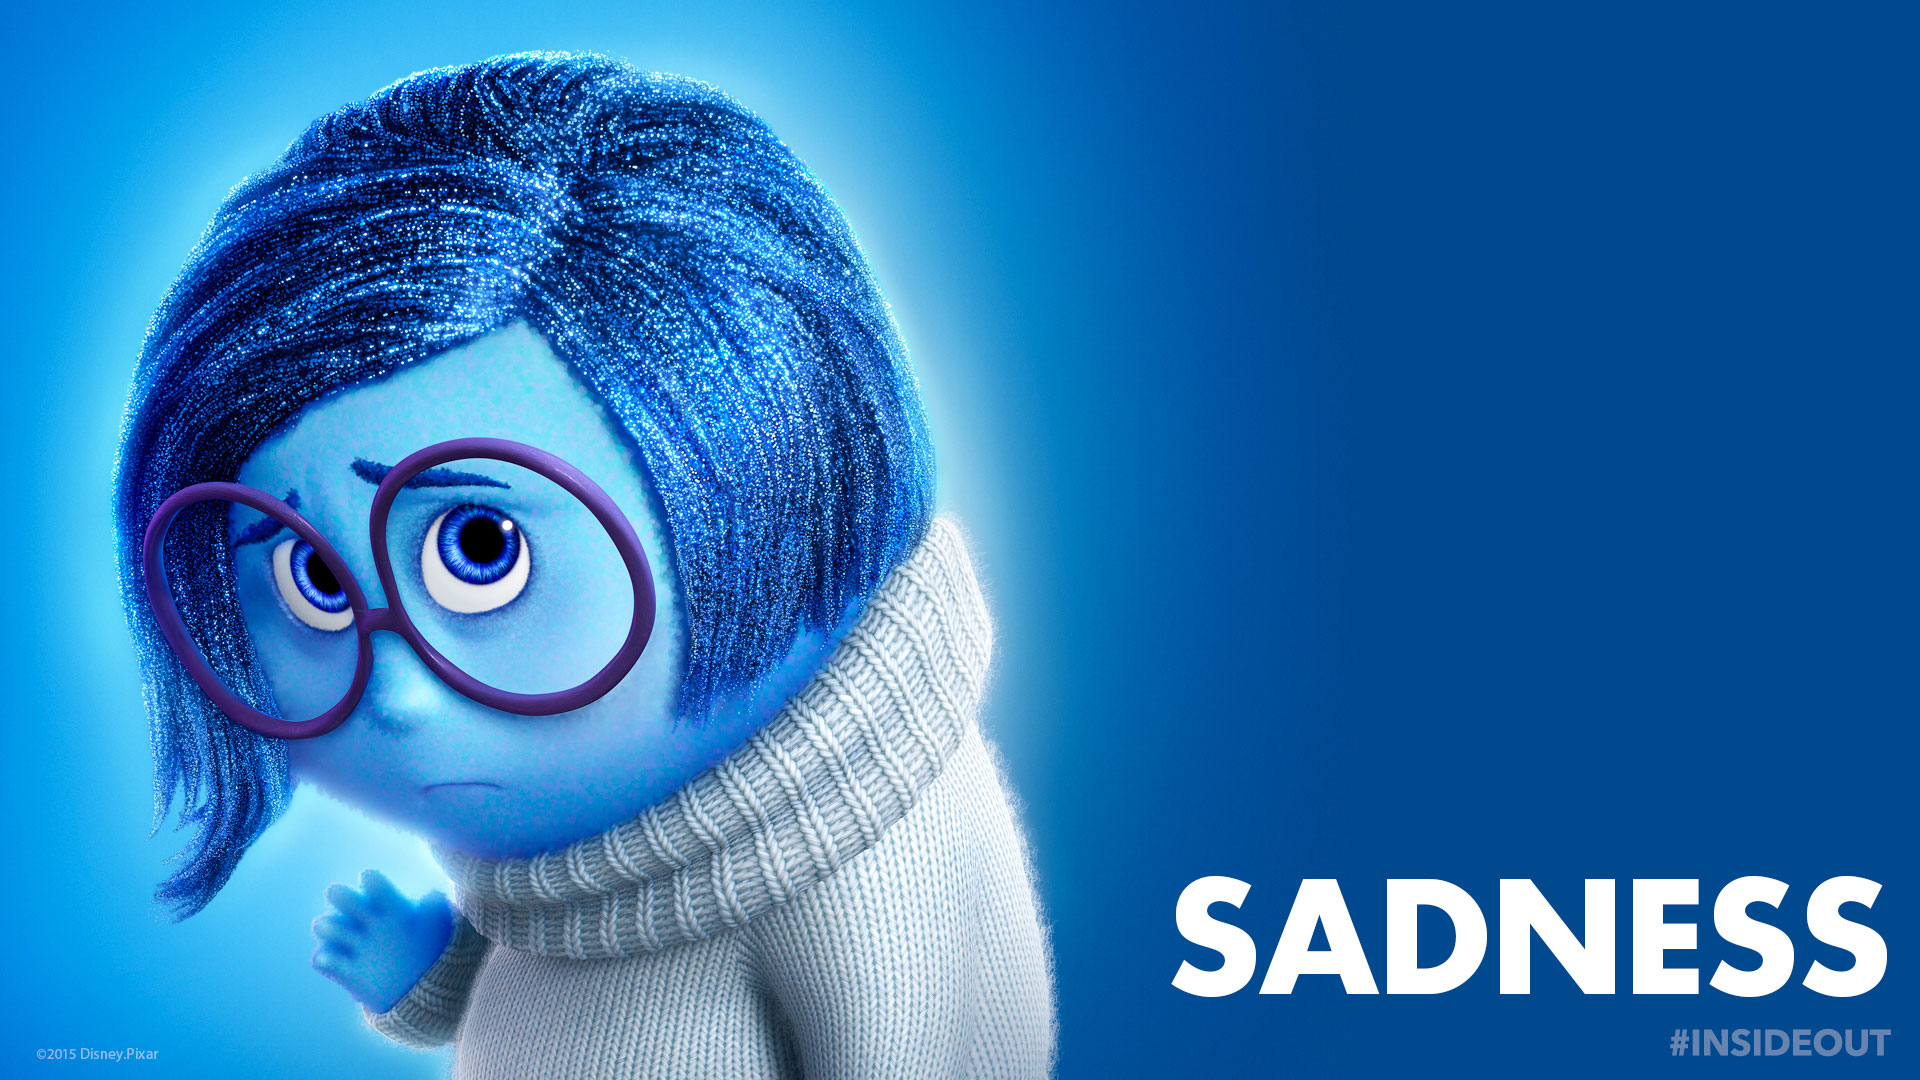 Inside Out Sadness Wallpaper backgrounds 2015